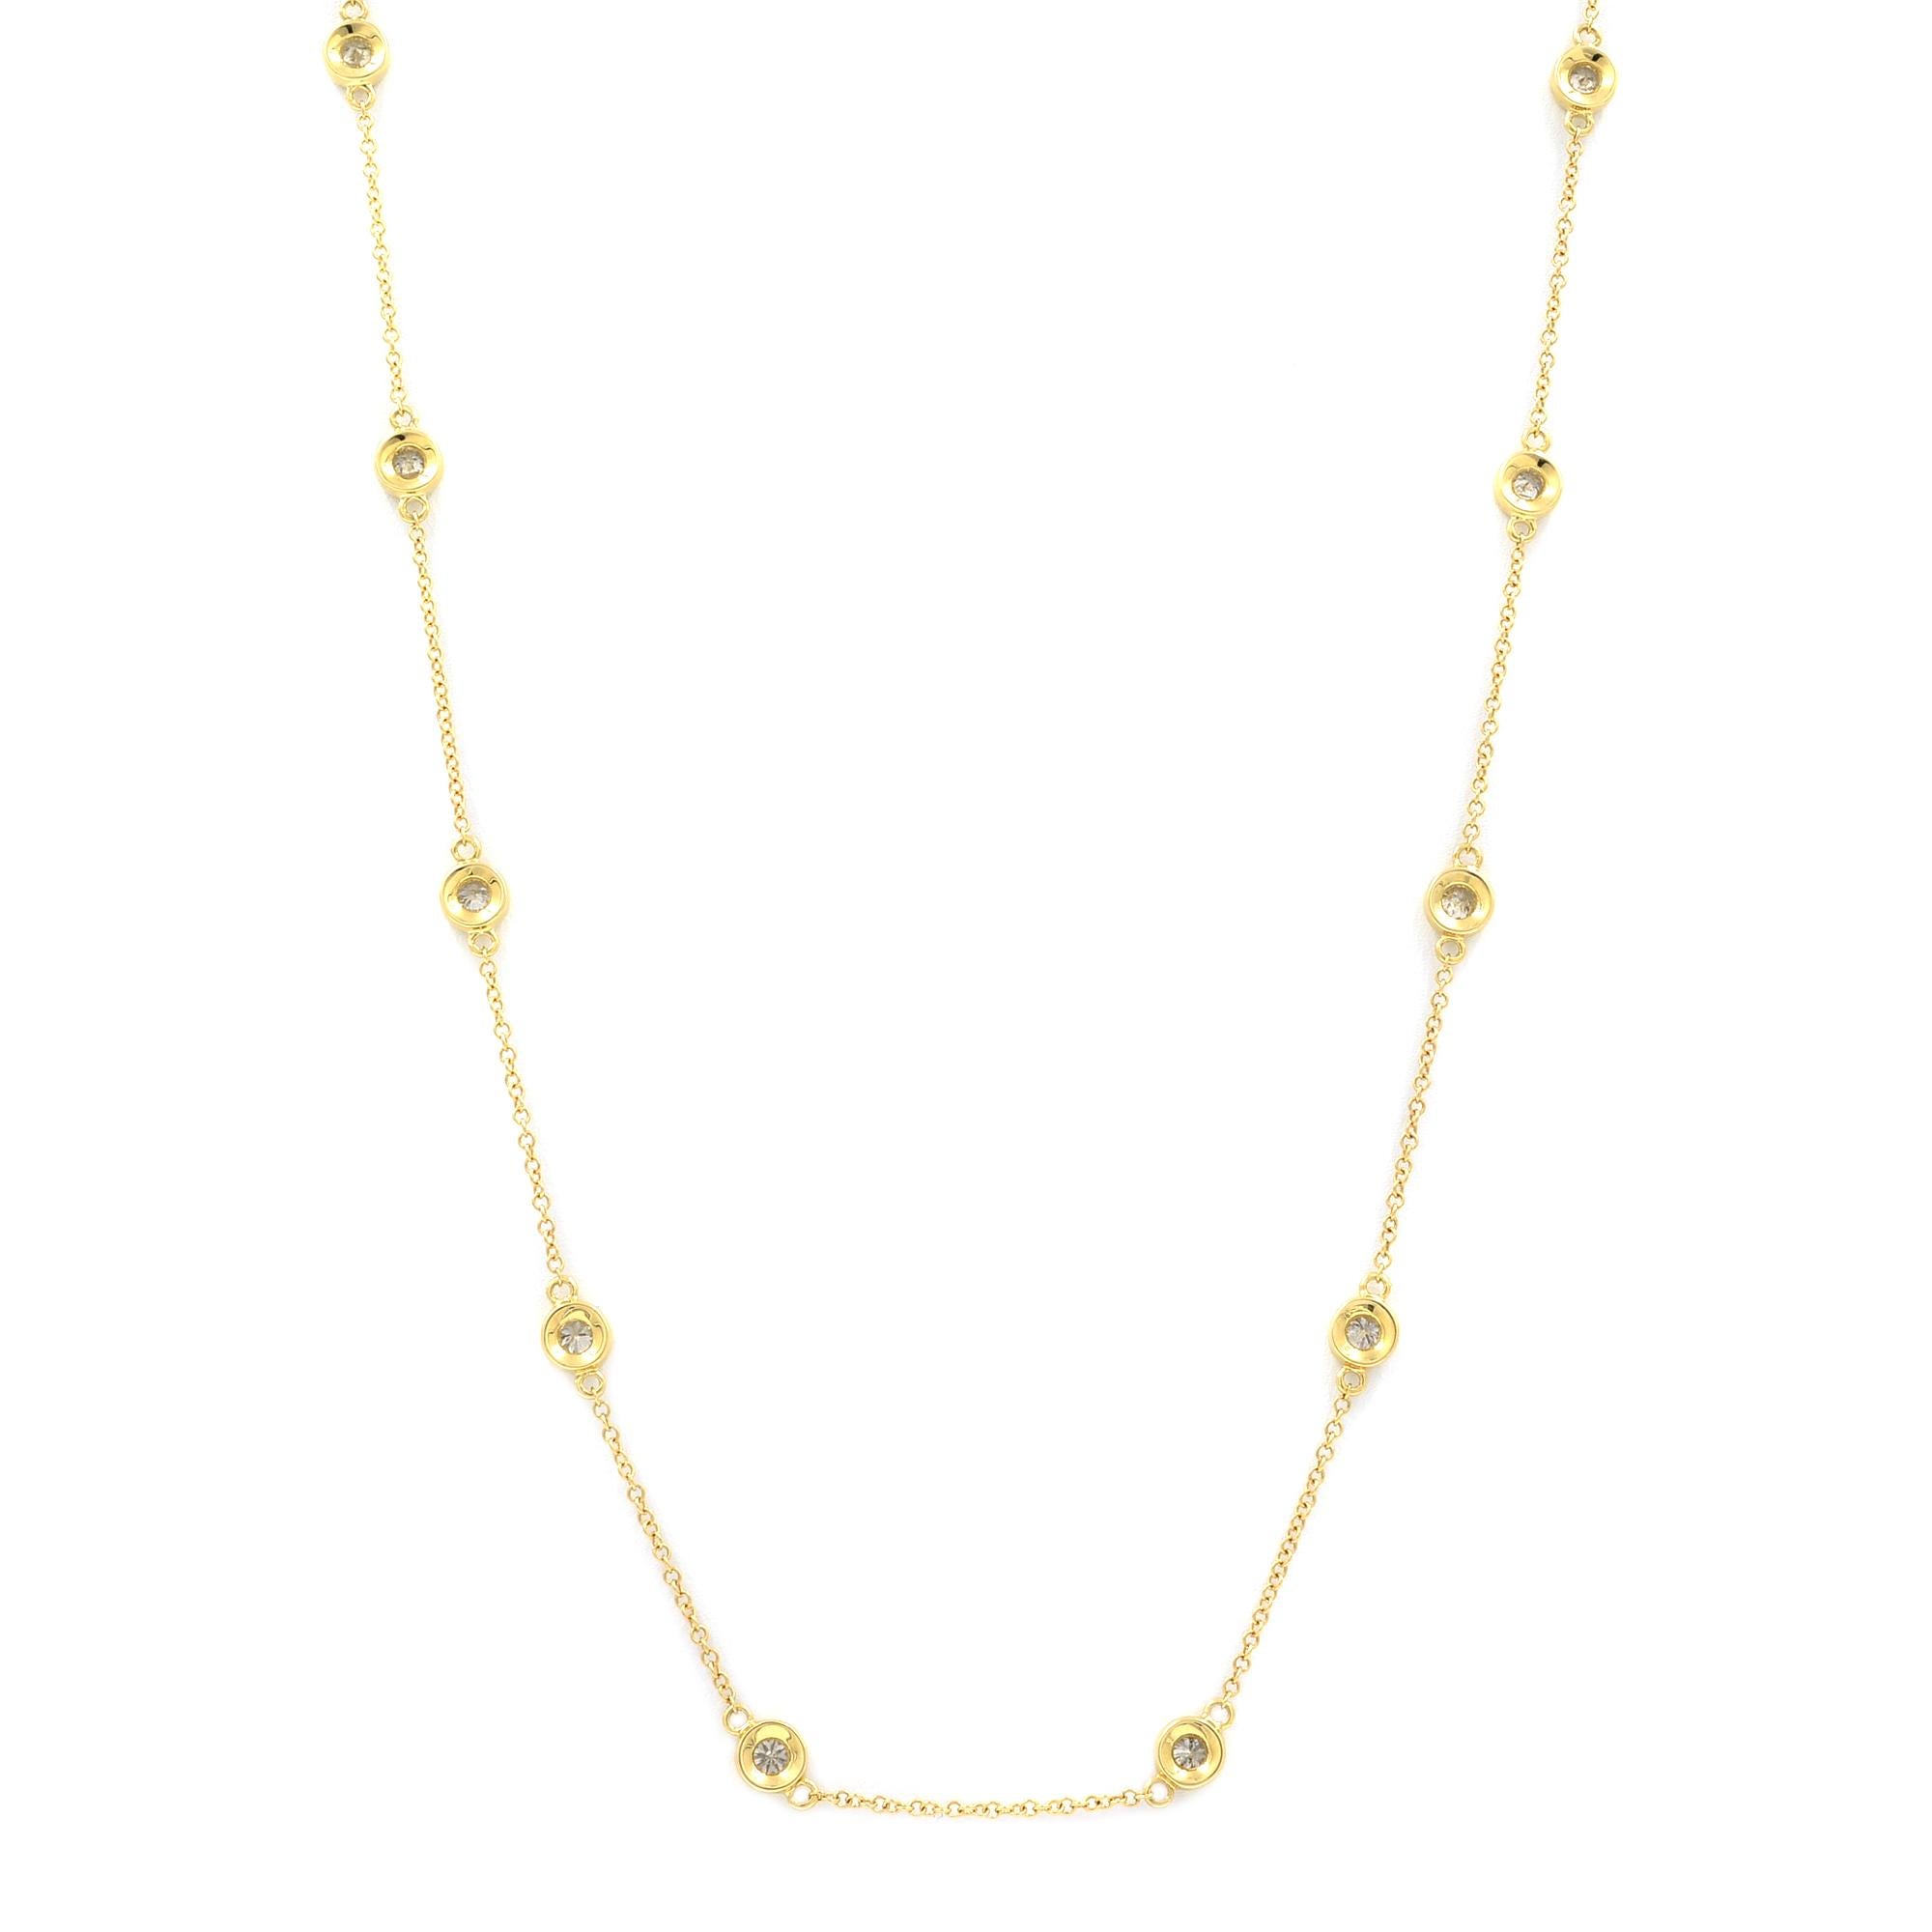 Round Cut Rachel Koen Diamonds by the Yard Necklace 14K Yellow Gold 0.77Cttw For Sale